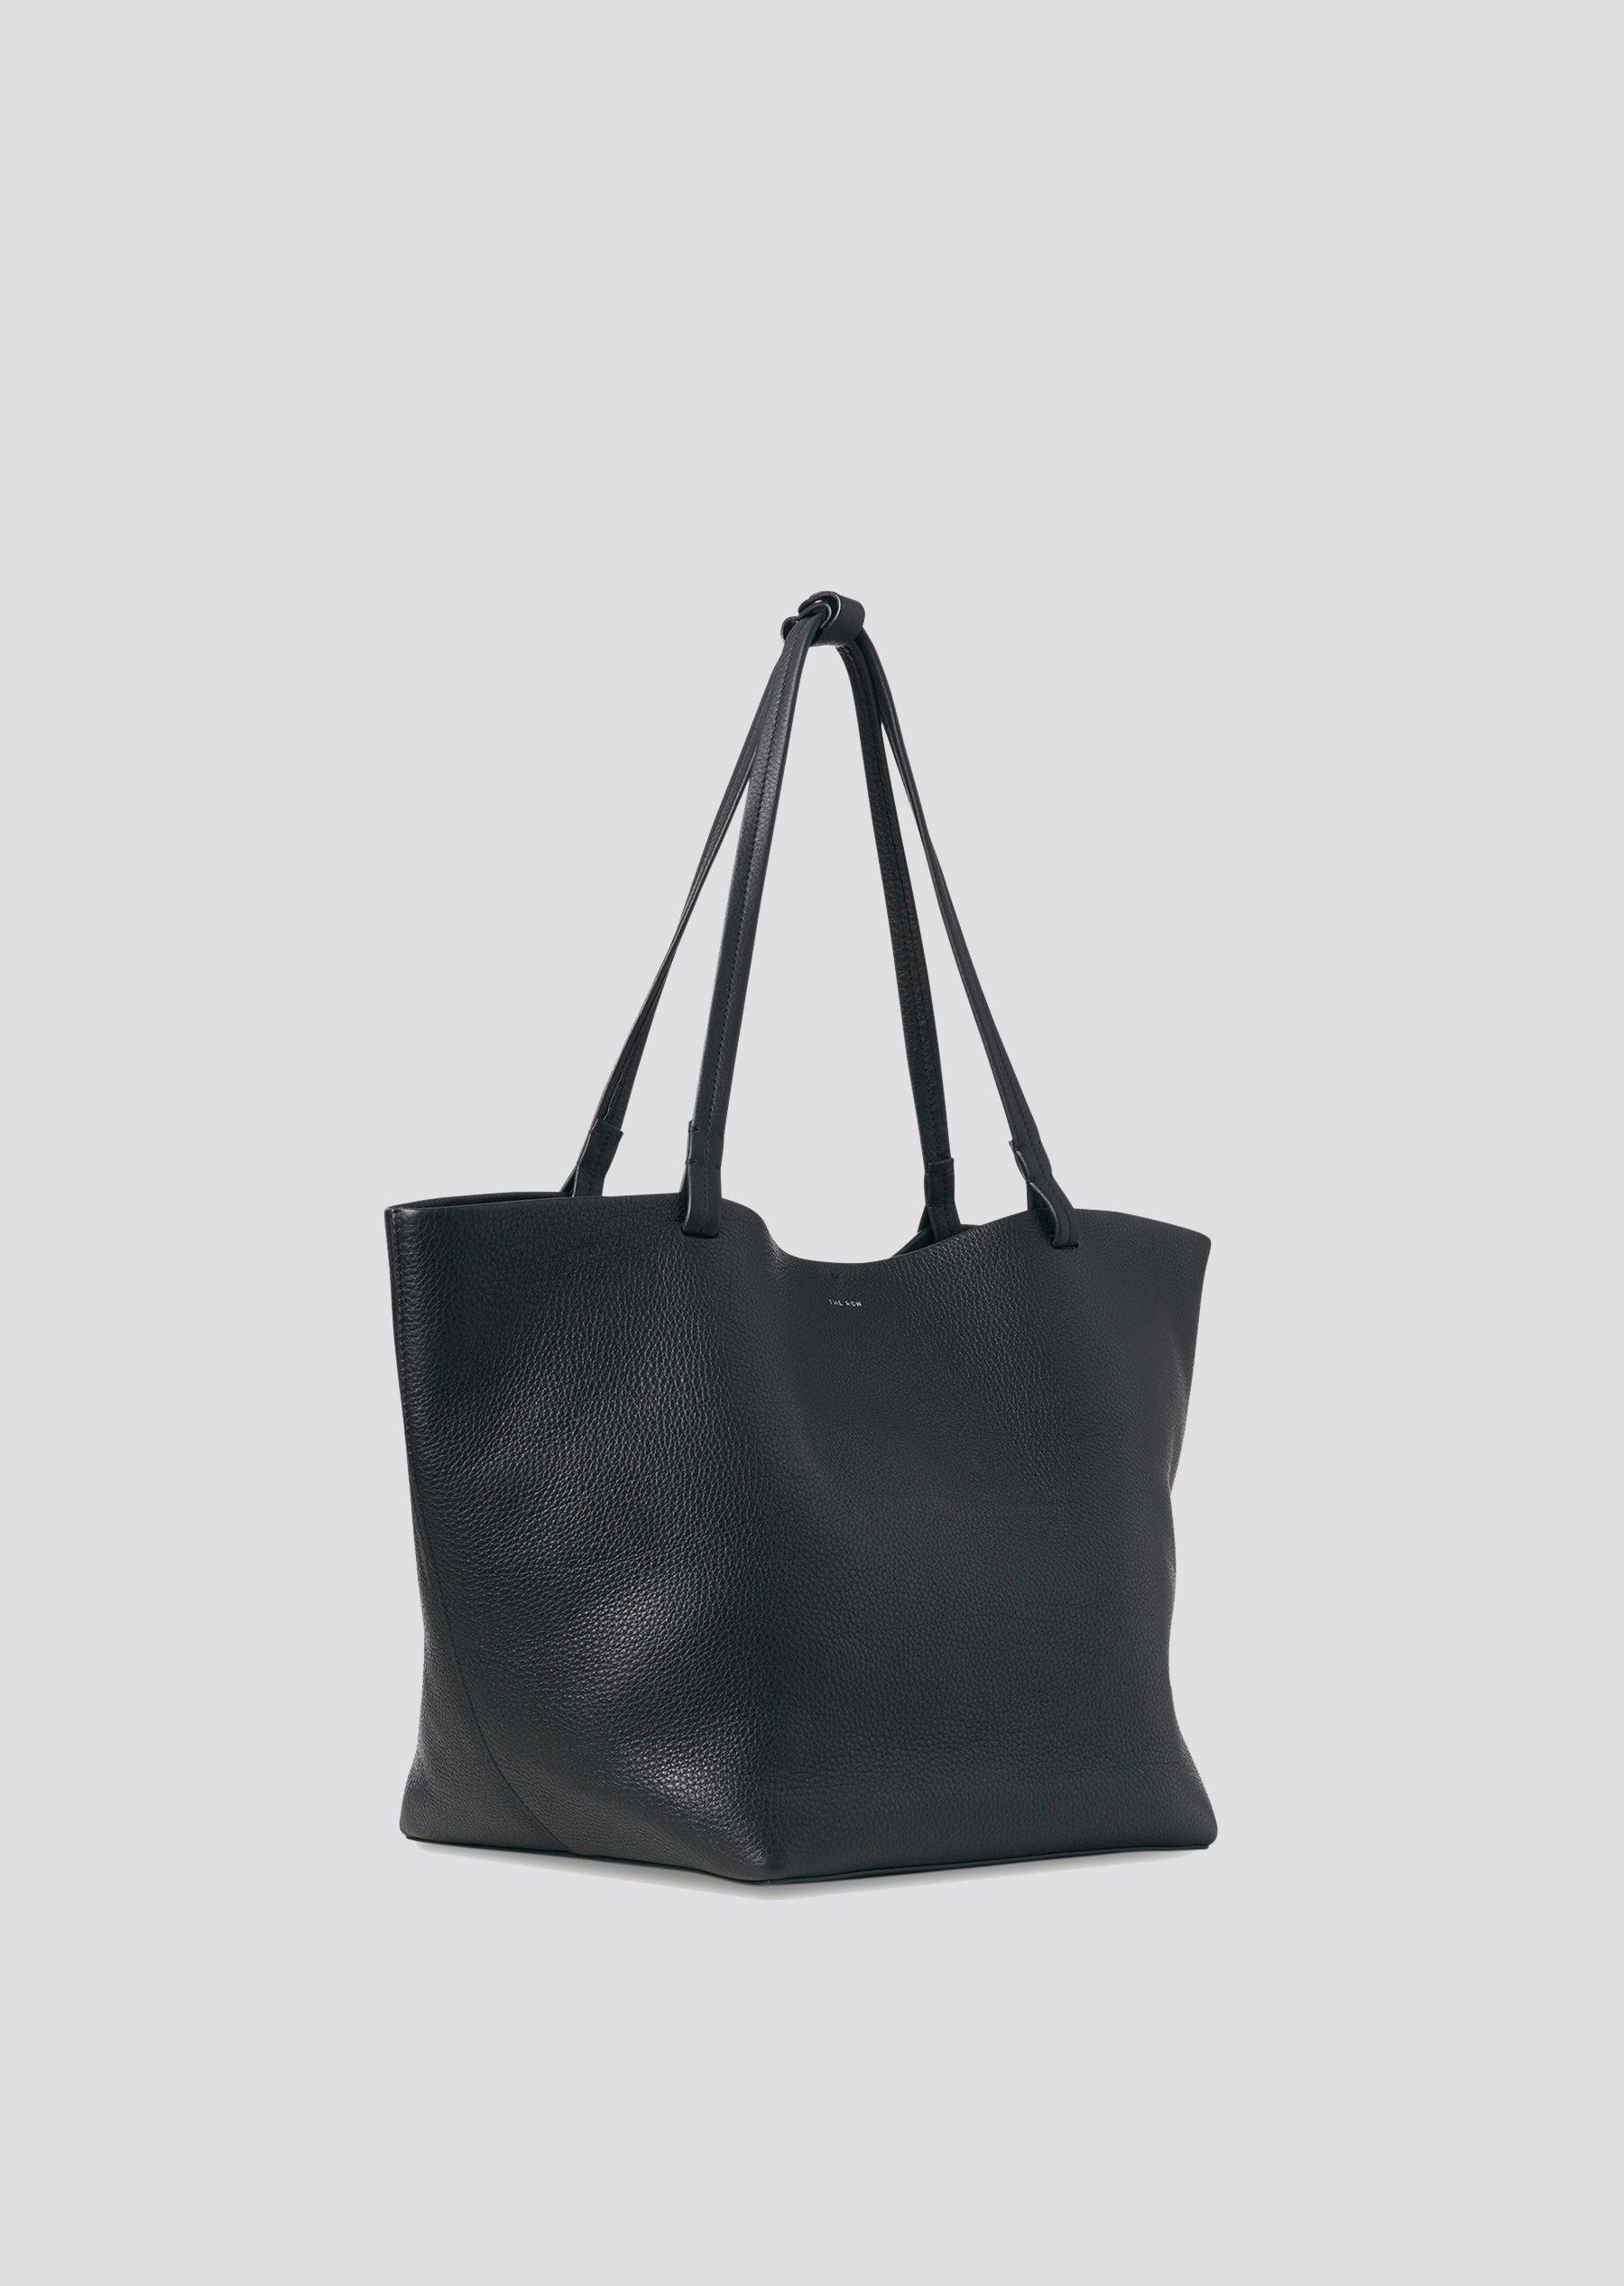 Shop The Row The Row Park Tote Totes by suzakk